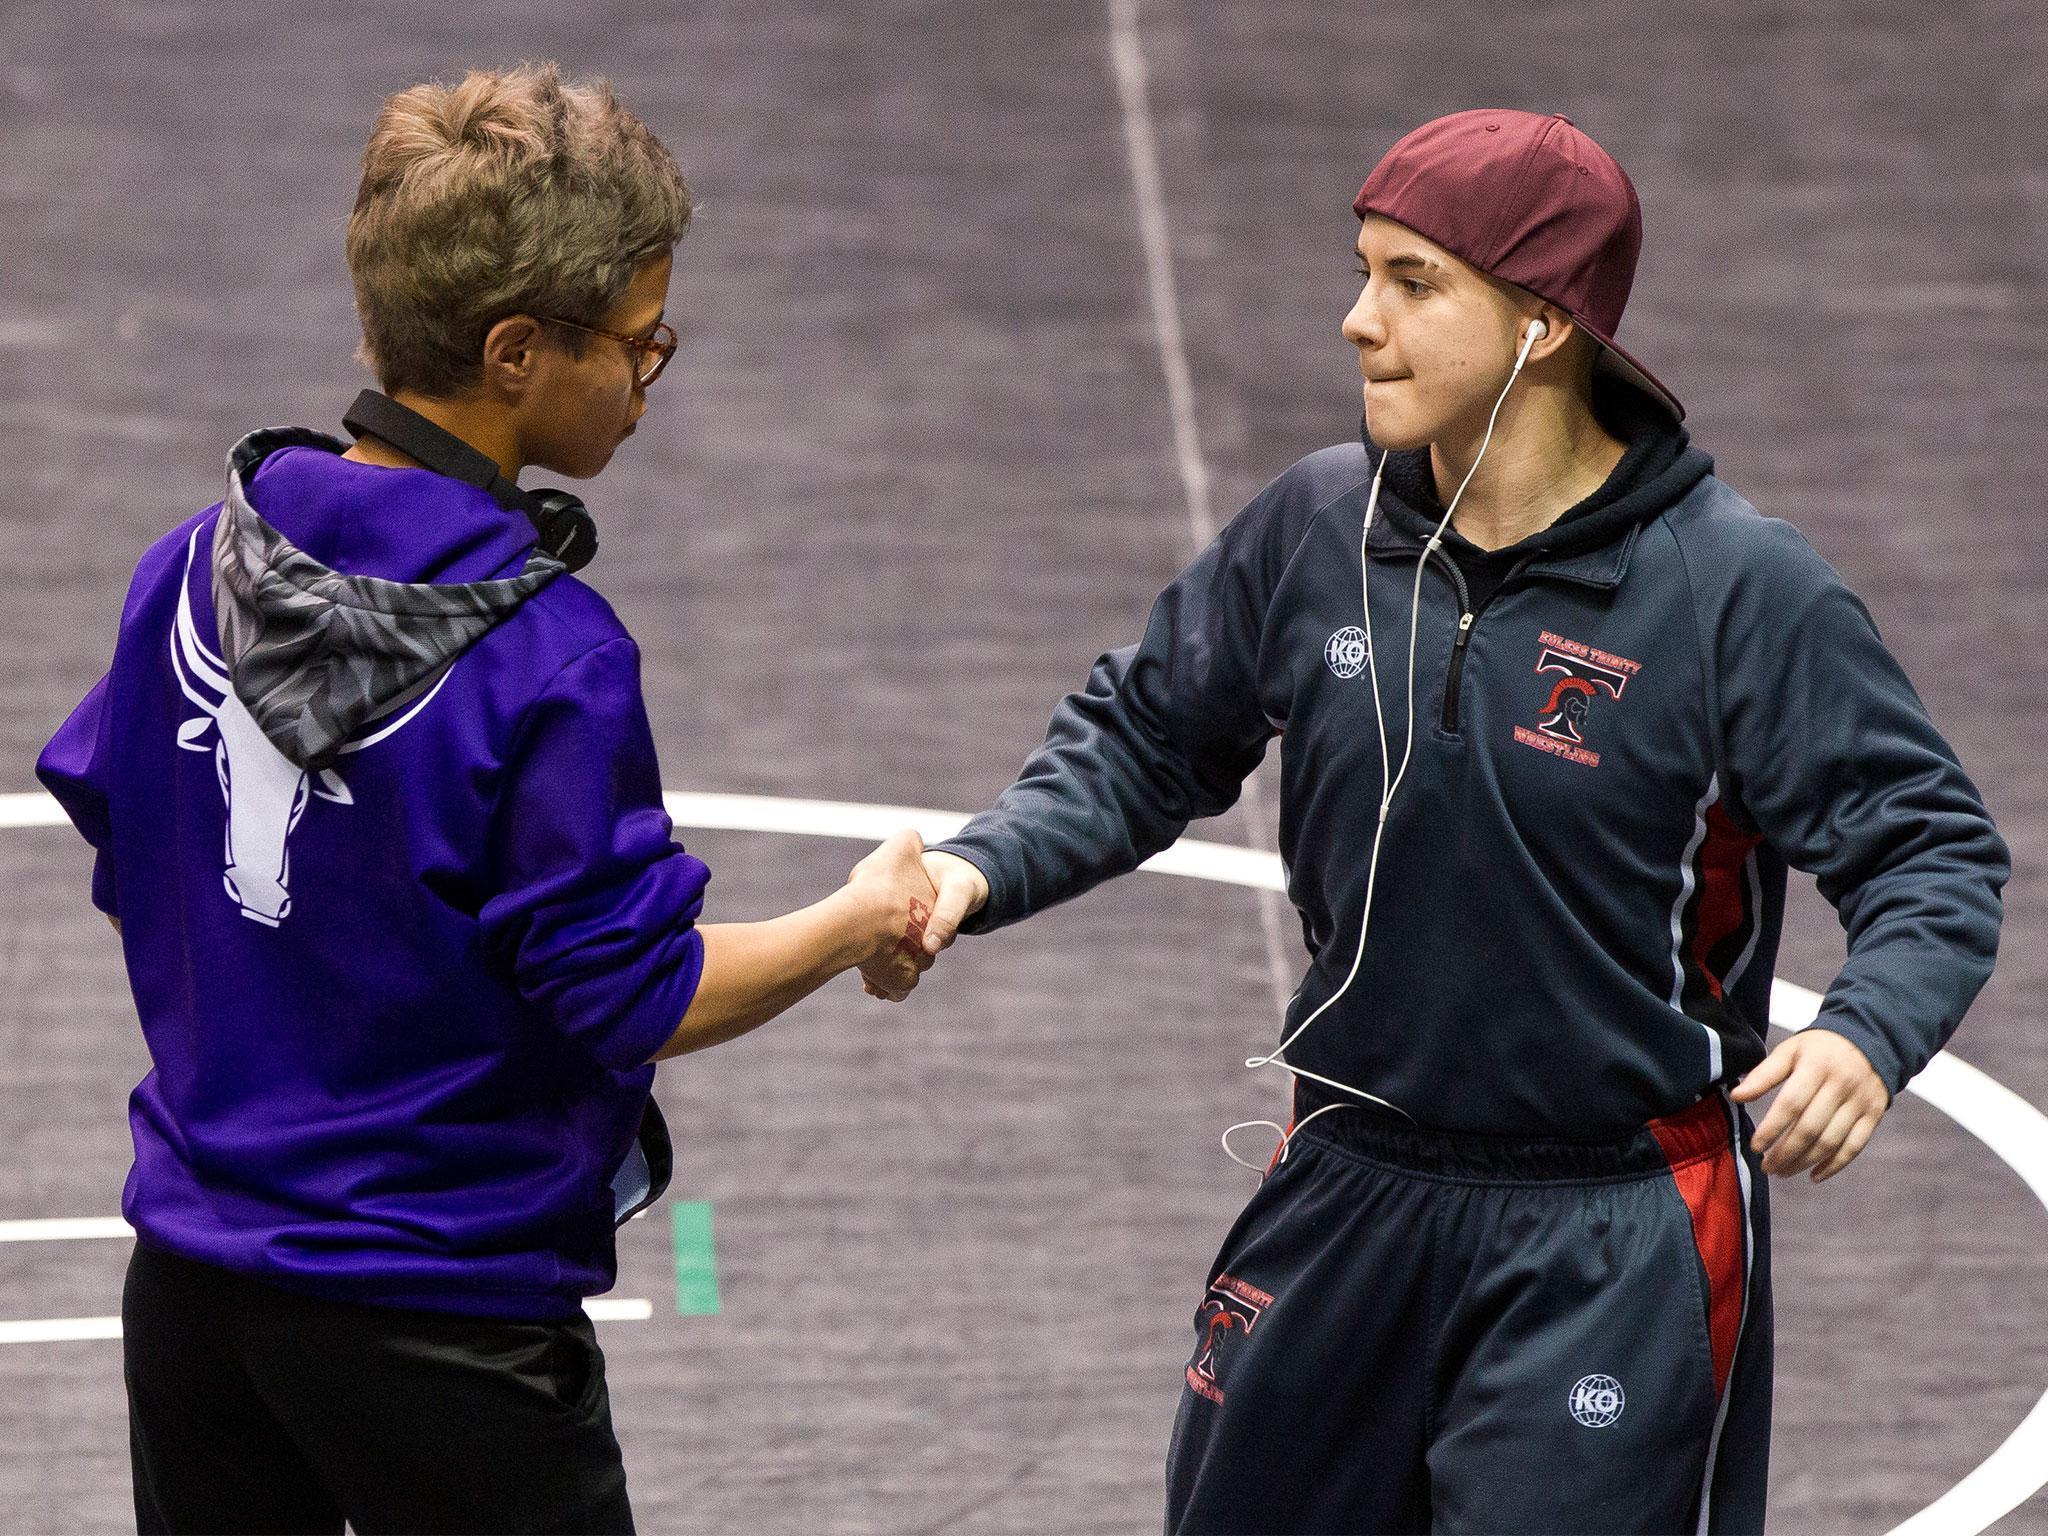 Mack Beggs (right) shakes hands with state championship final opponent Chelsea Sanchez